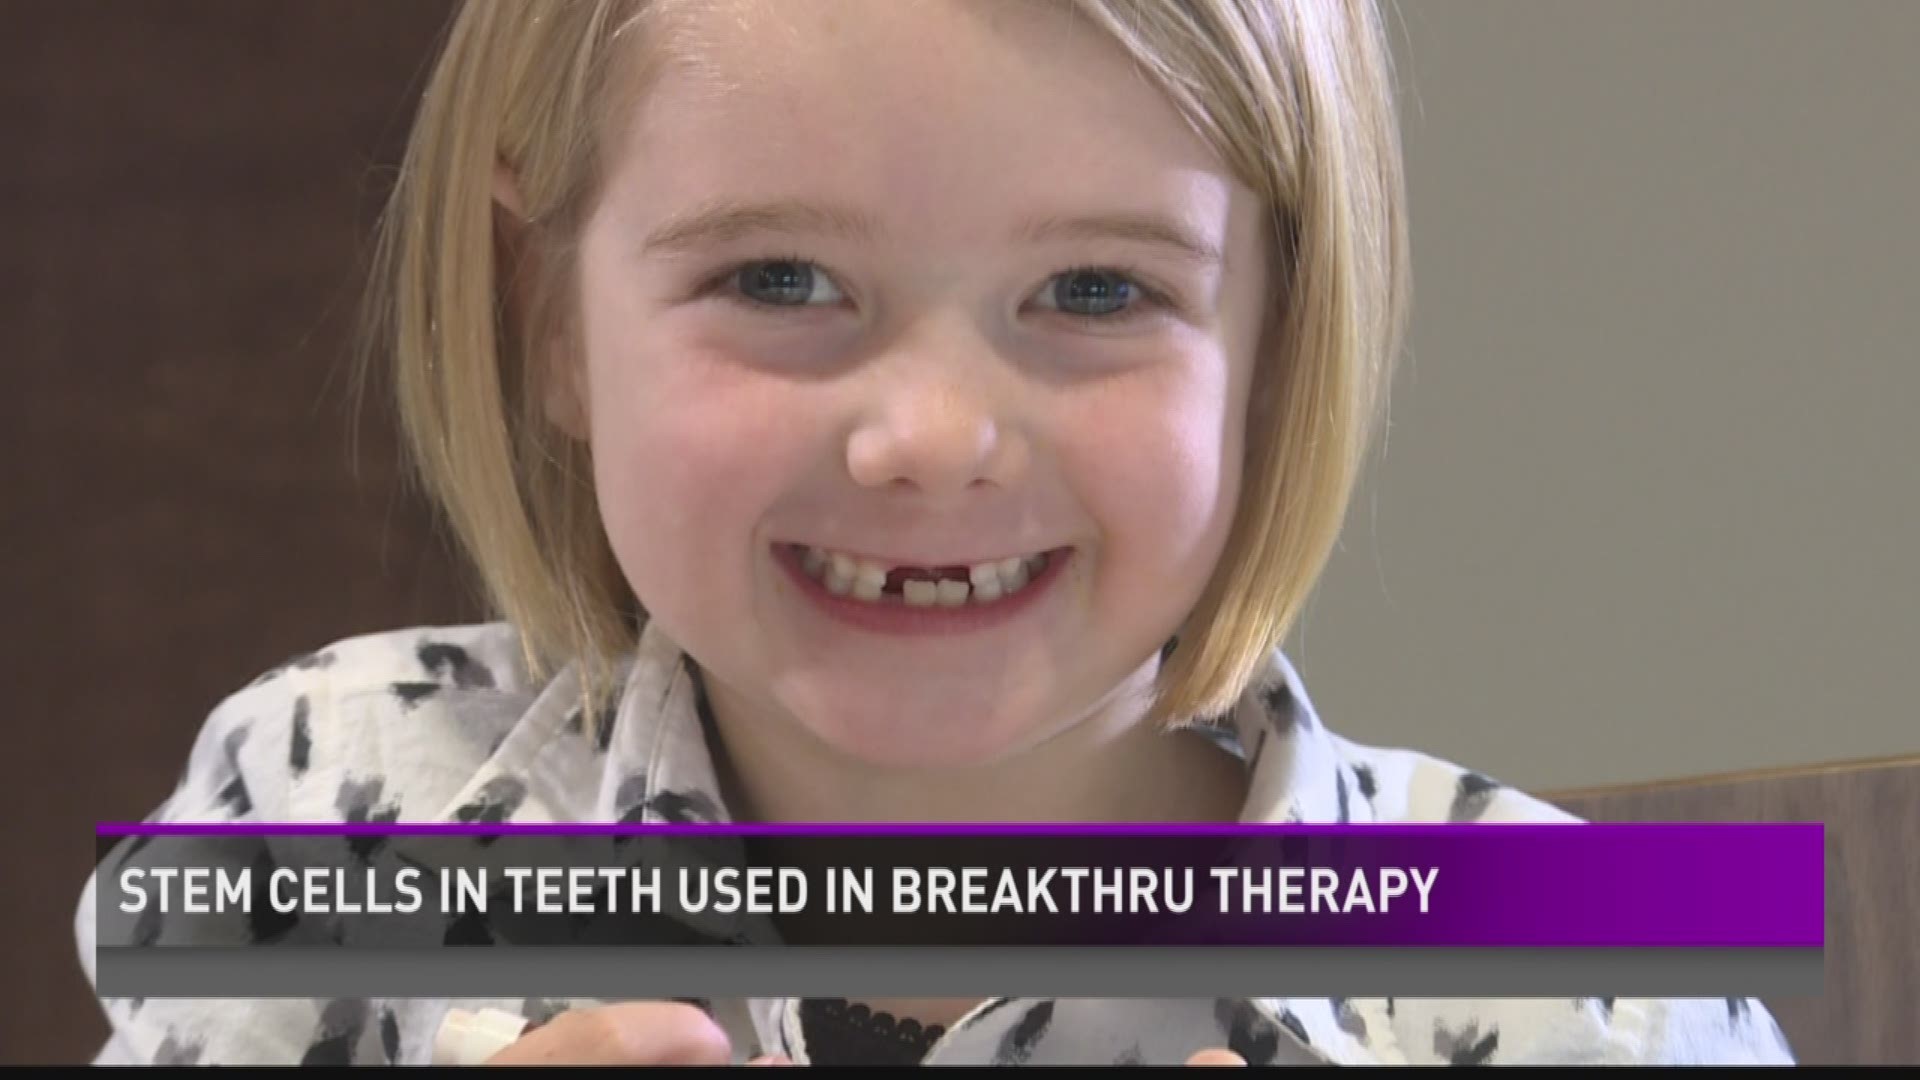 Stem cells in teeth used in breakthrough therapy